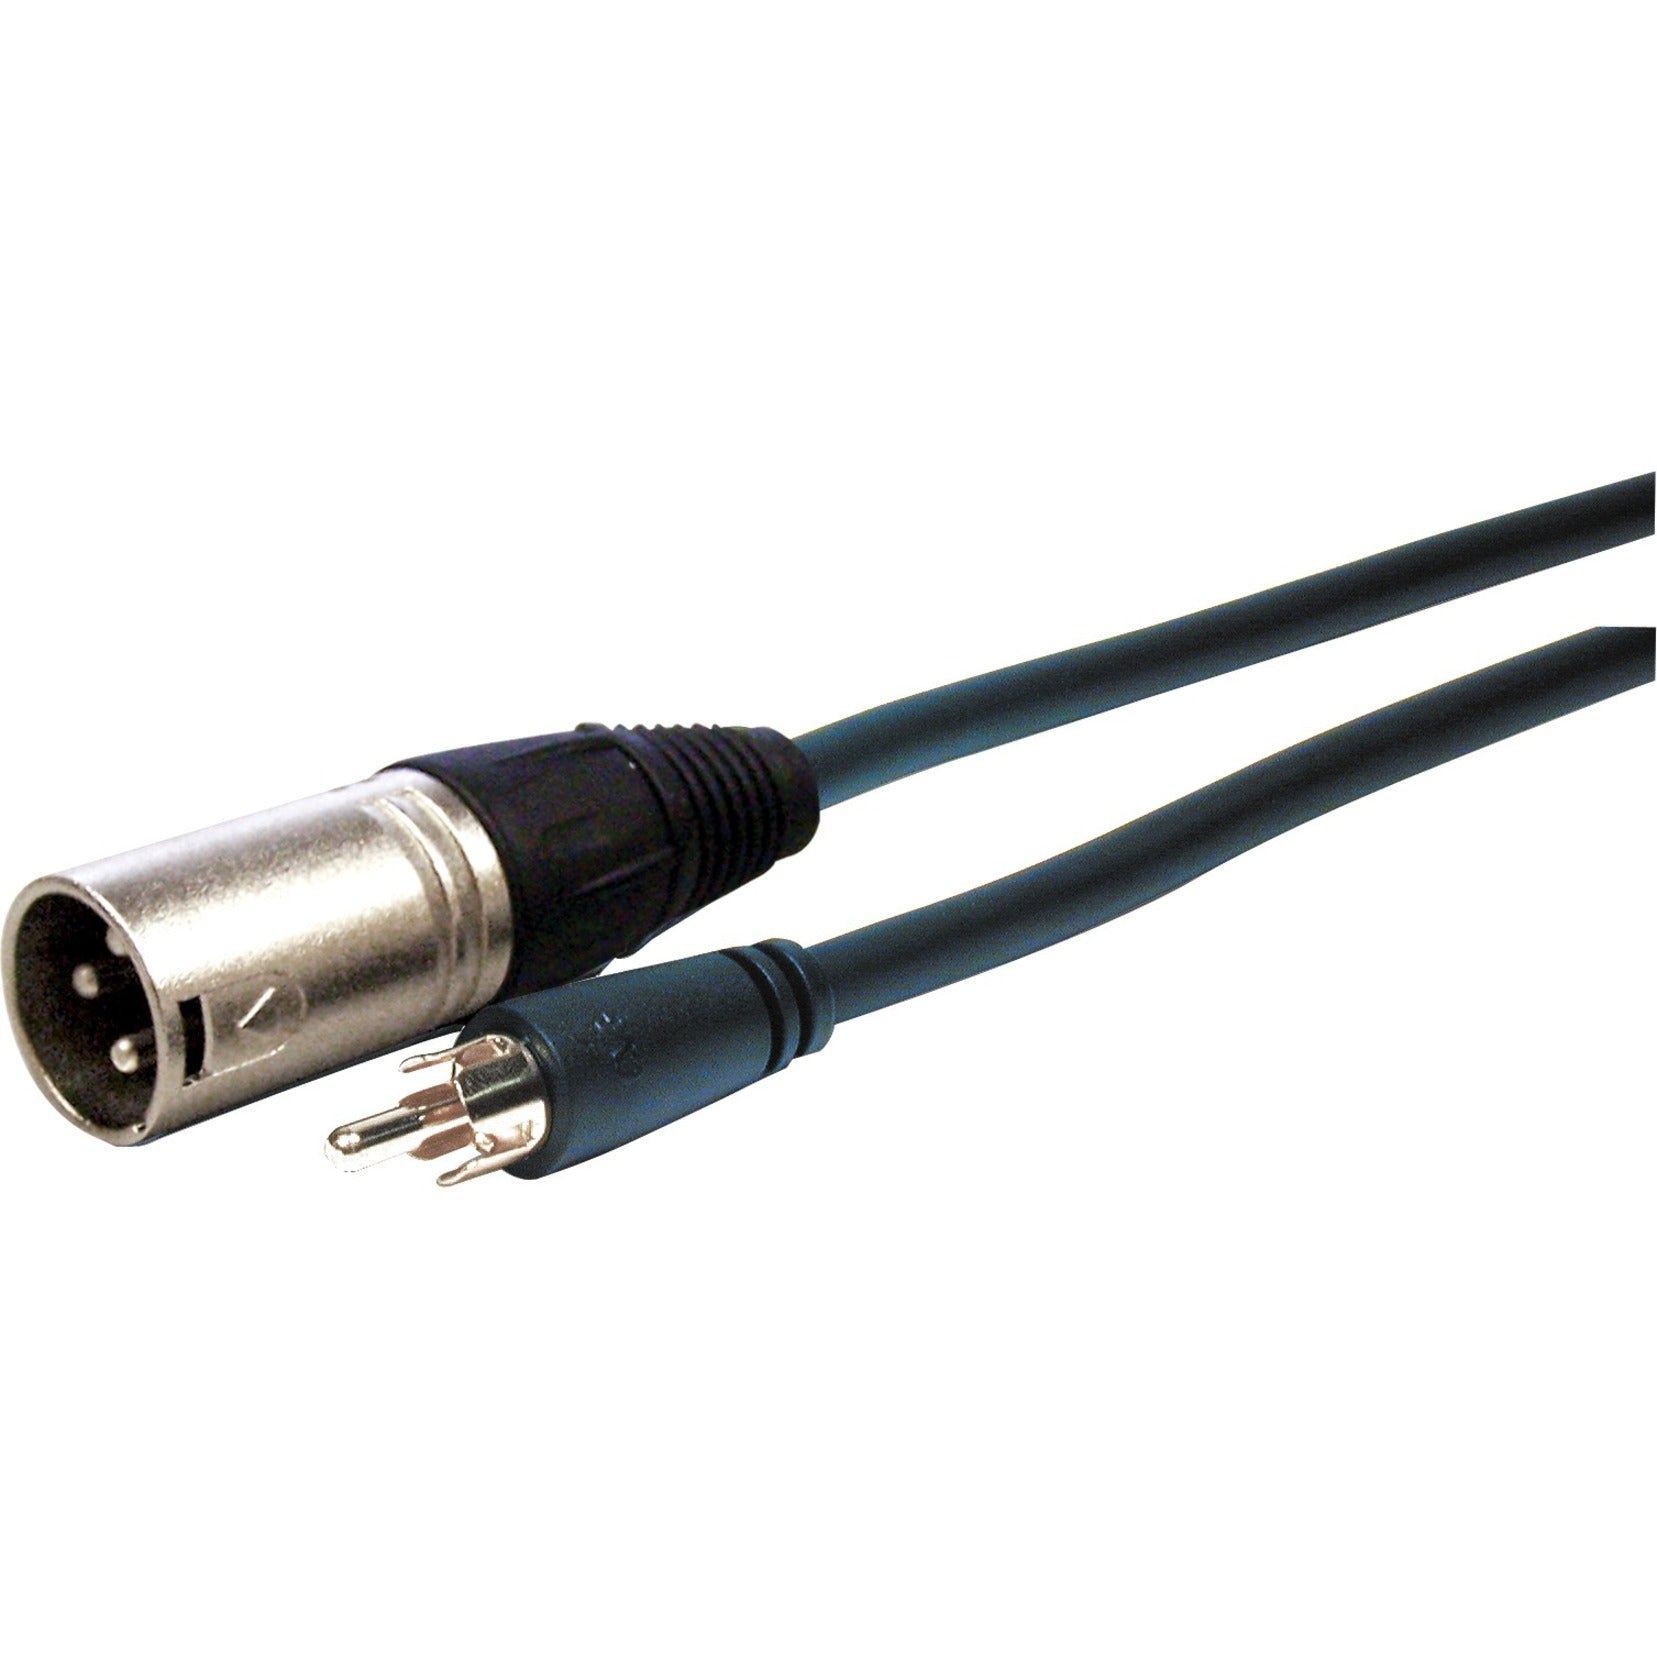 Comprehensive XLRP-PP-3ST Standard Series XLR Plug to RCA Plug Audio Cable 3ft, EMI/RF Protection, Molded, Strain Relief, Copper Conductor, RoHS Certified